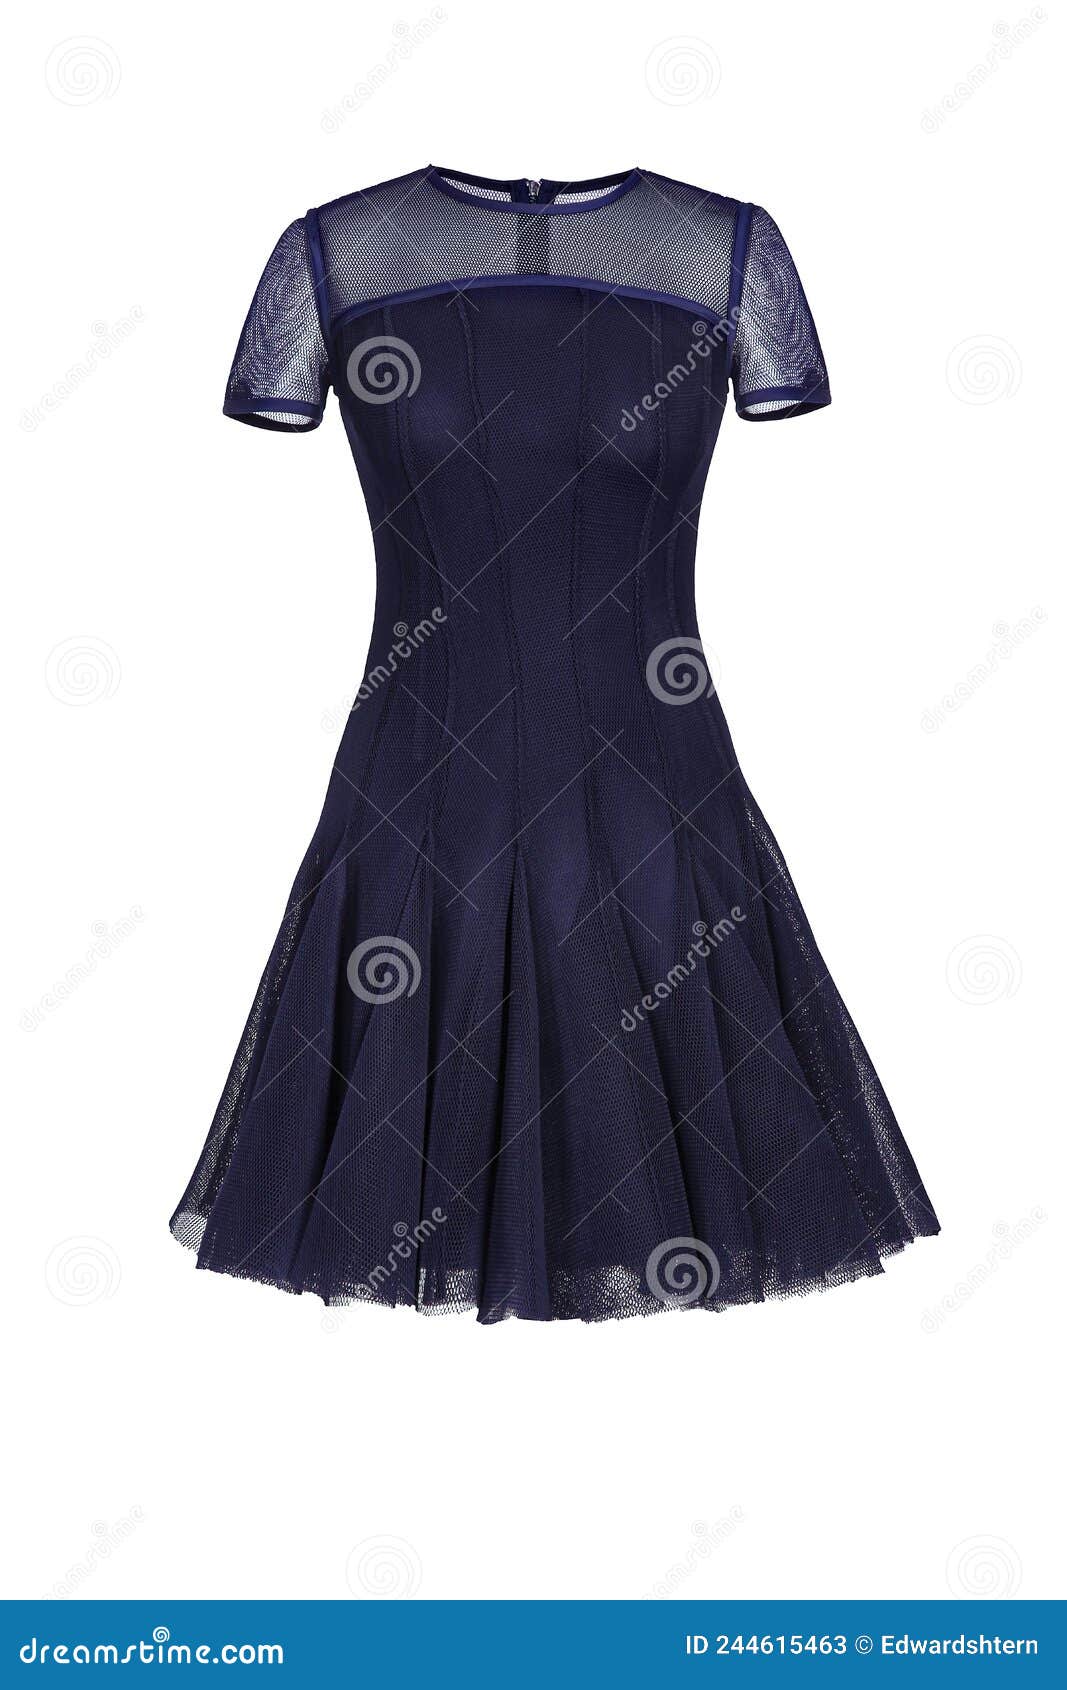 Little Blue Dress Isolated on White Stock Image - Image of form ...